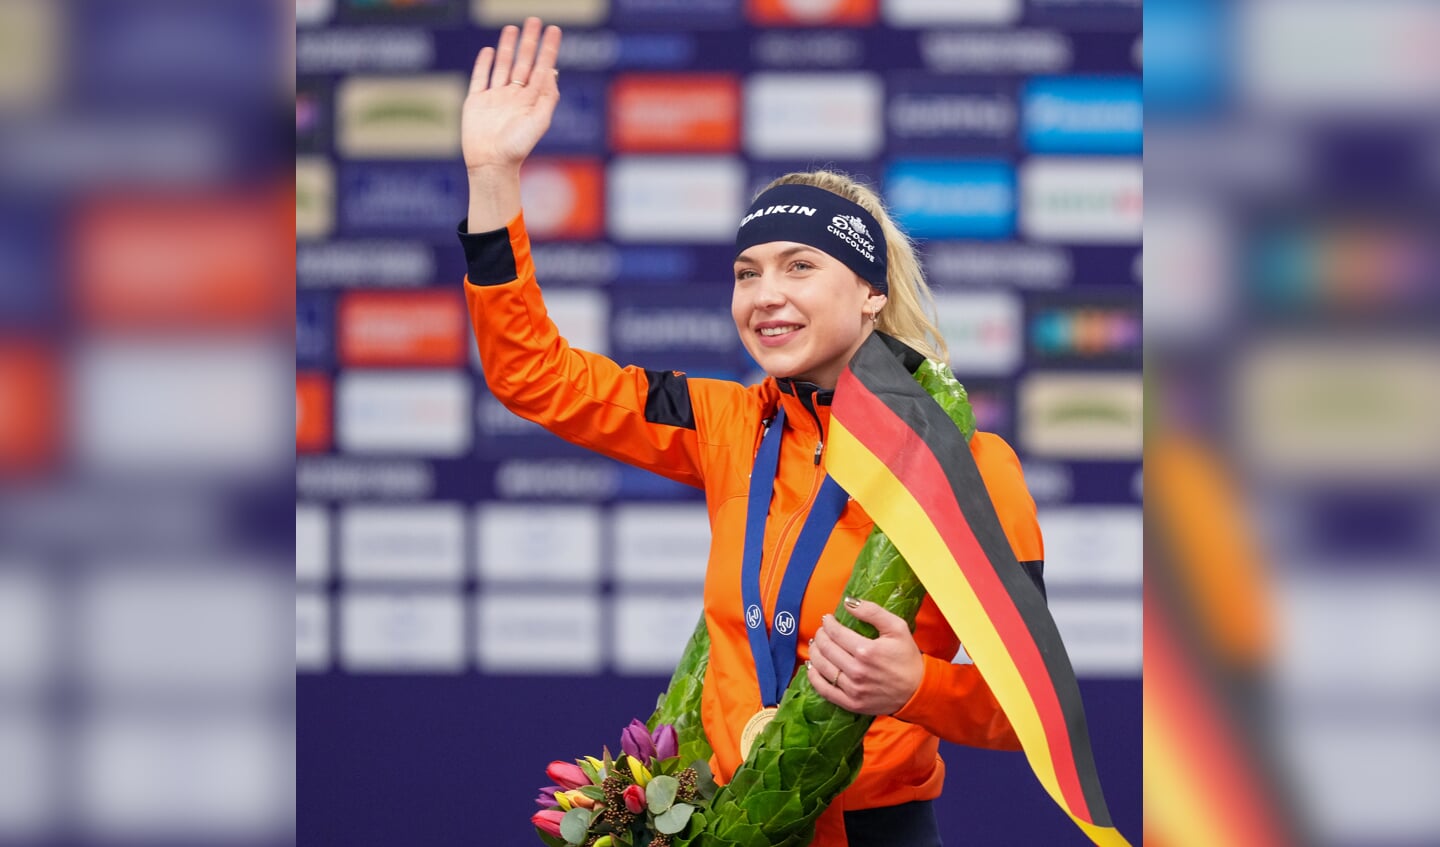 INZELL, GERMANY - MARCH 10: Joy Beune of The Netherlands competing on the Men's 10000m during the ISU World Speed Skating Allround Championships at Max Aicher Arena on March 10, 2024 in Inzell, Germany. (Photo by Douwe Bijlsma/Orange Pictures)